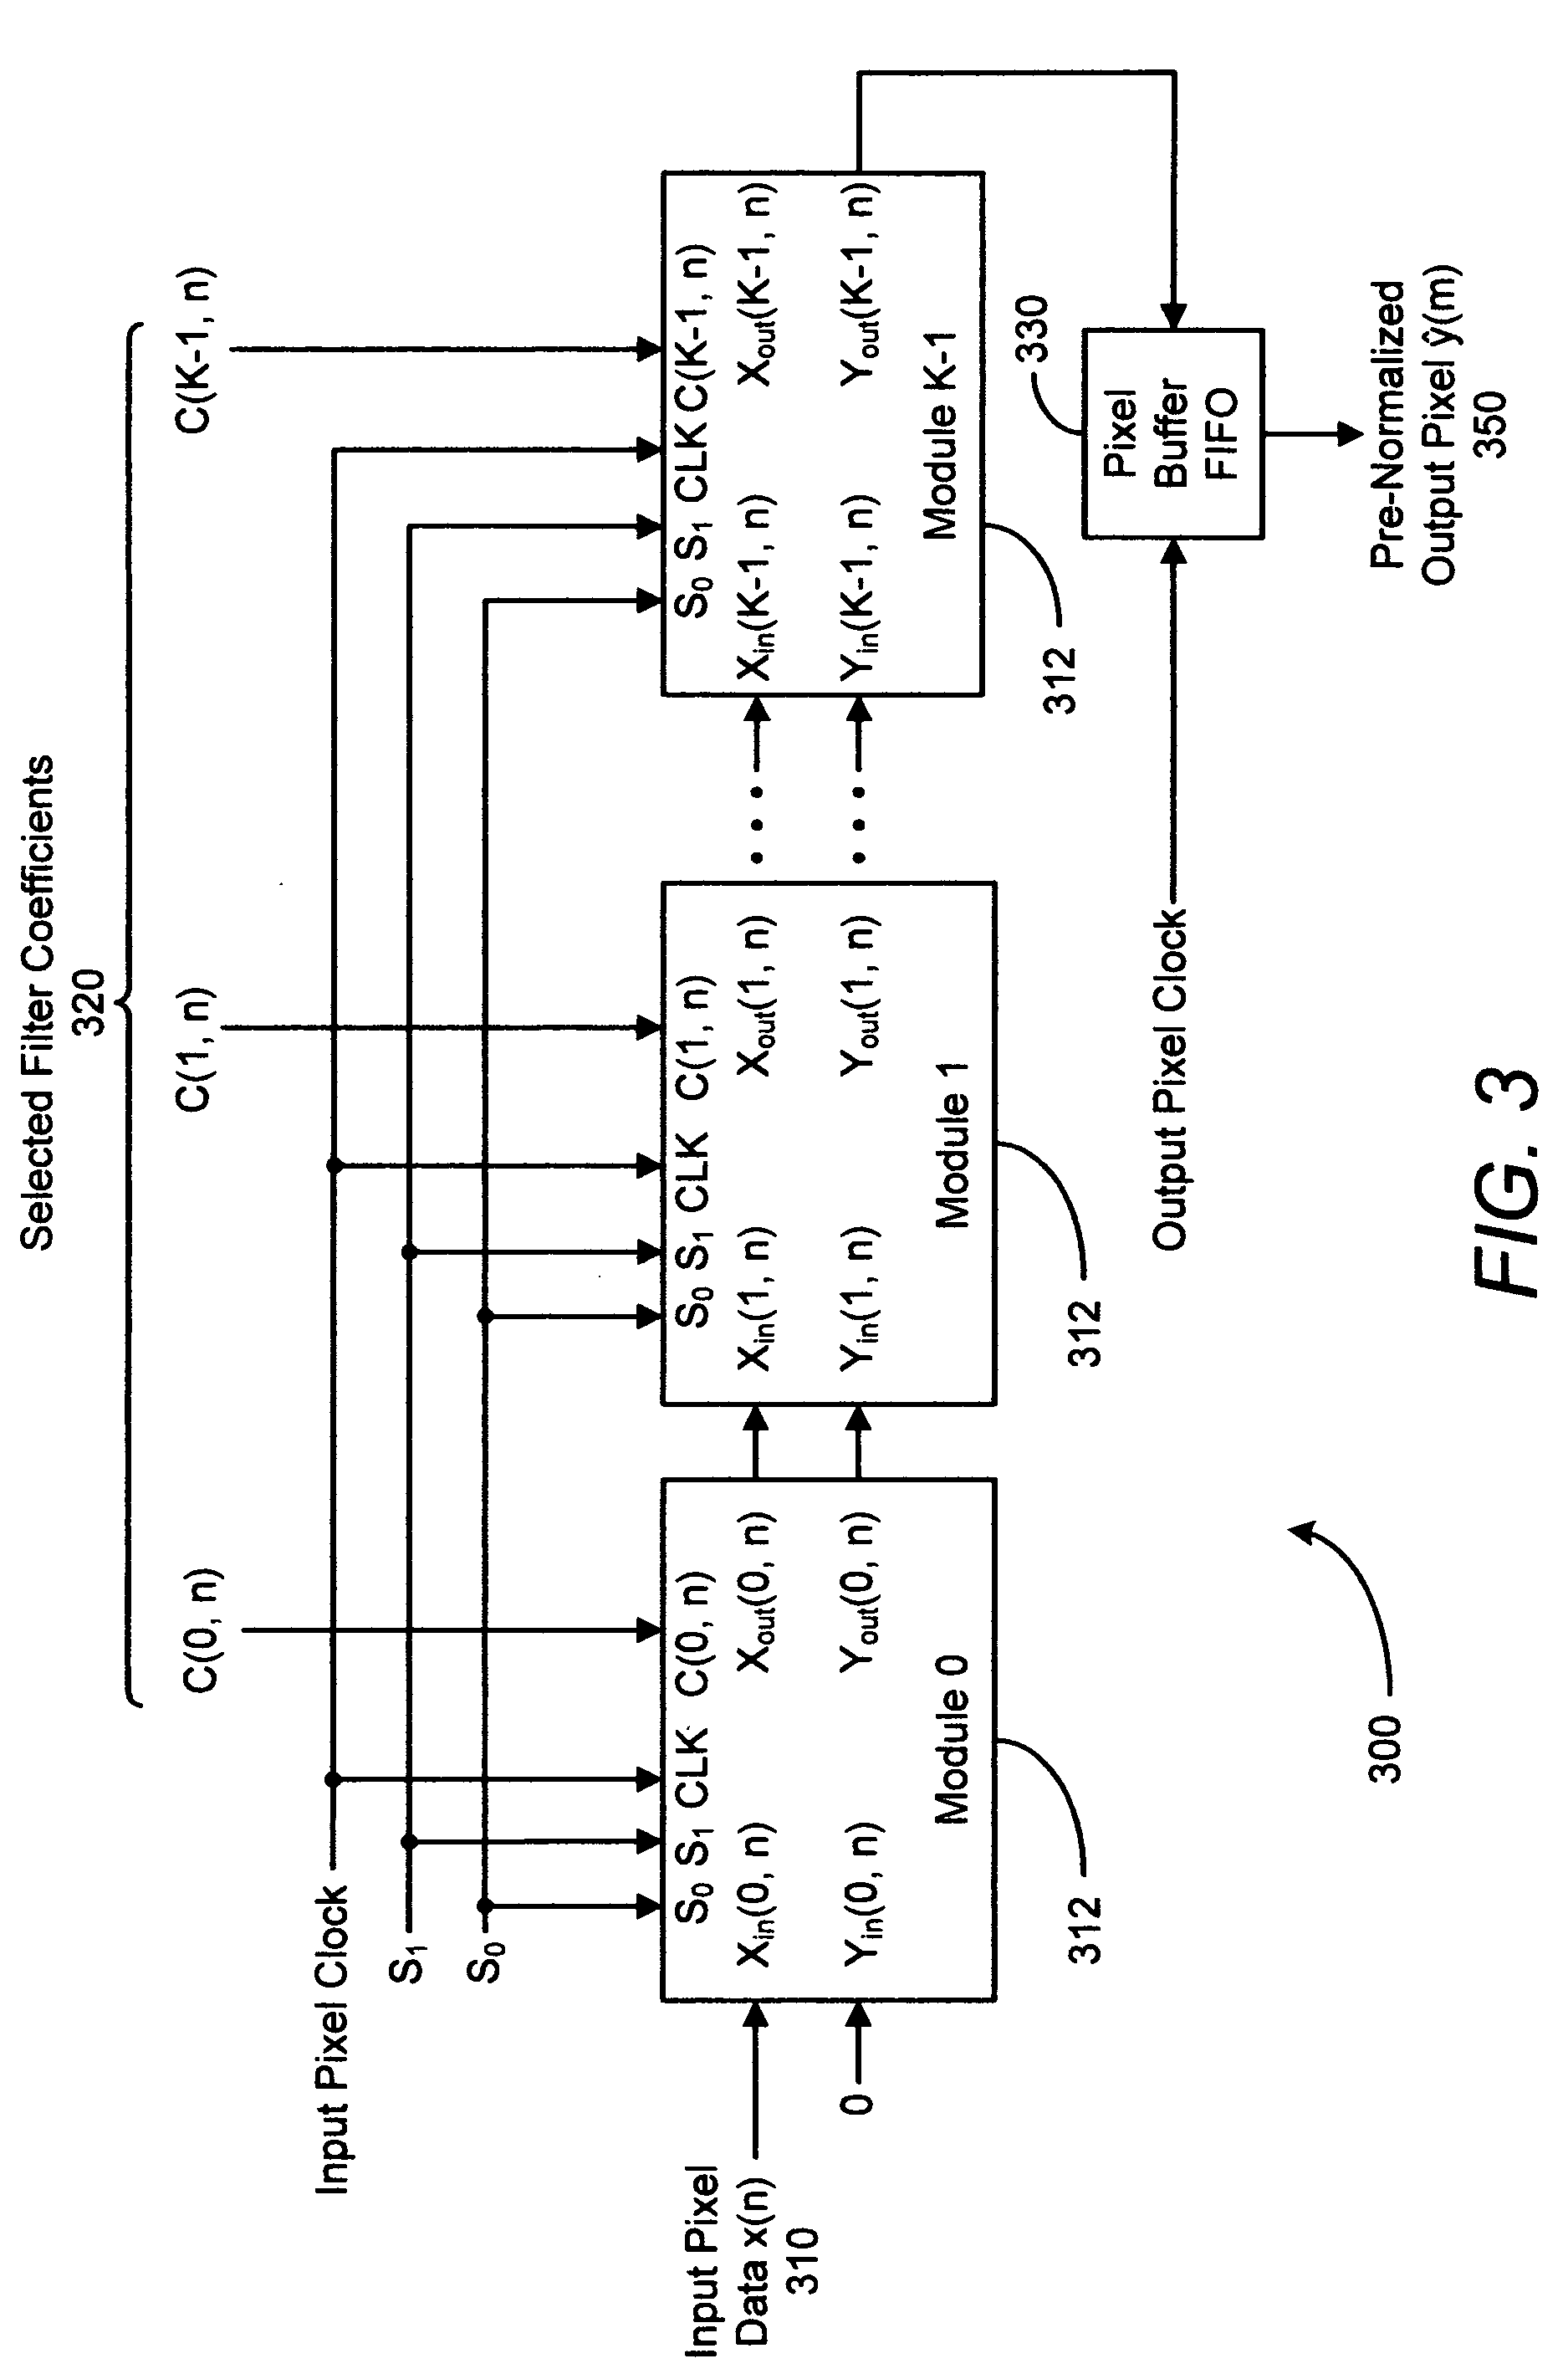 Method and system for digital image magnification and reduction